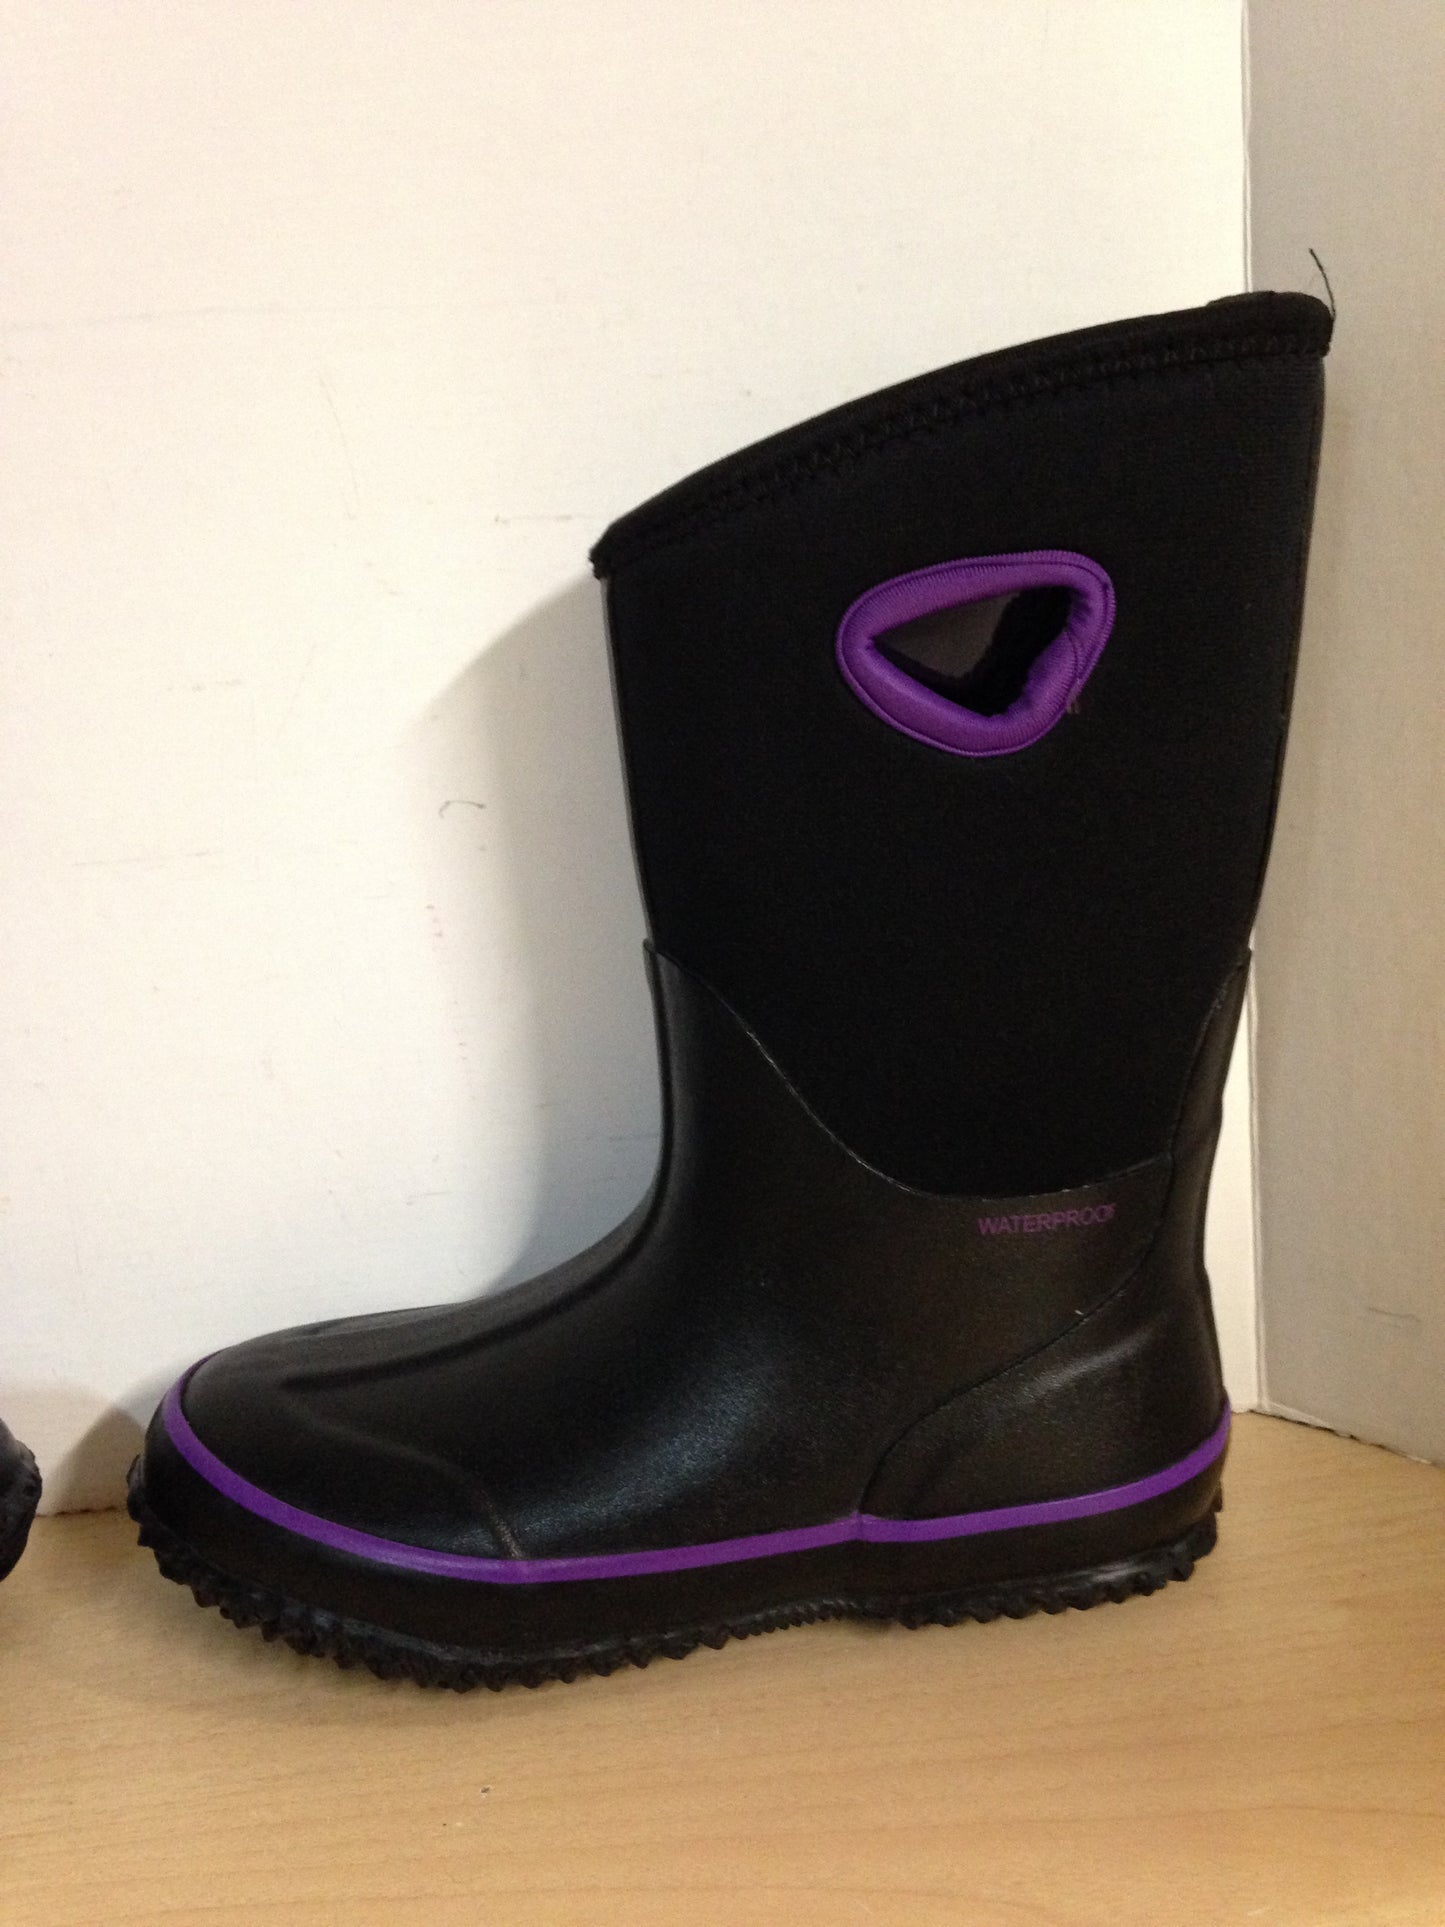 Bogs Style Child Size 3 Neoprene Rubber Rain Winter Boots Waterproof Black and Purple Excellent